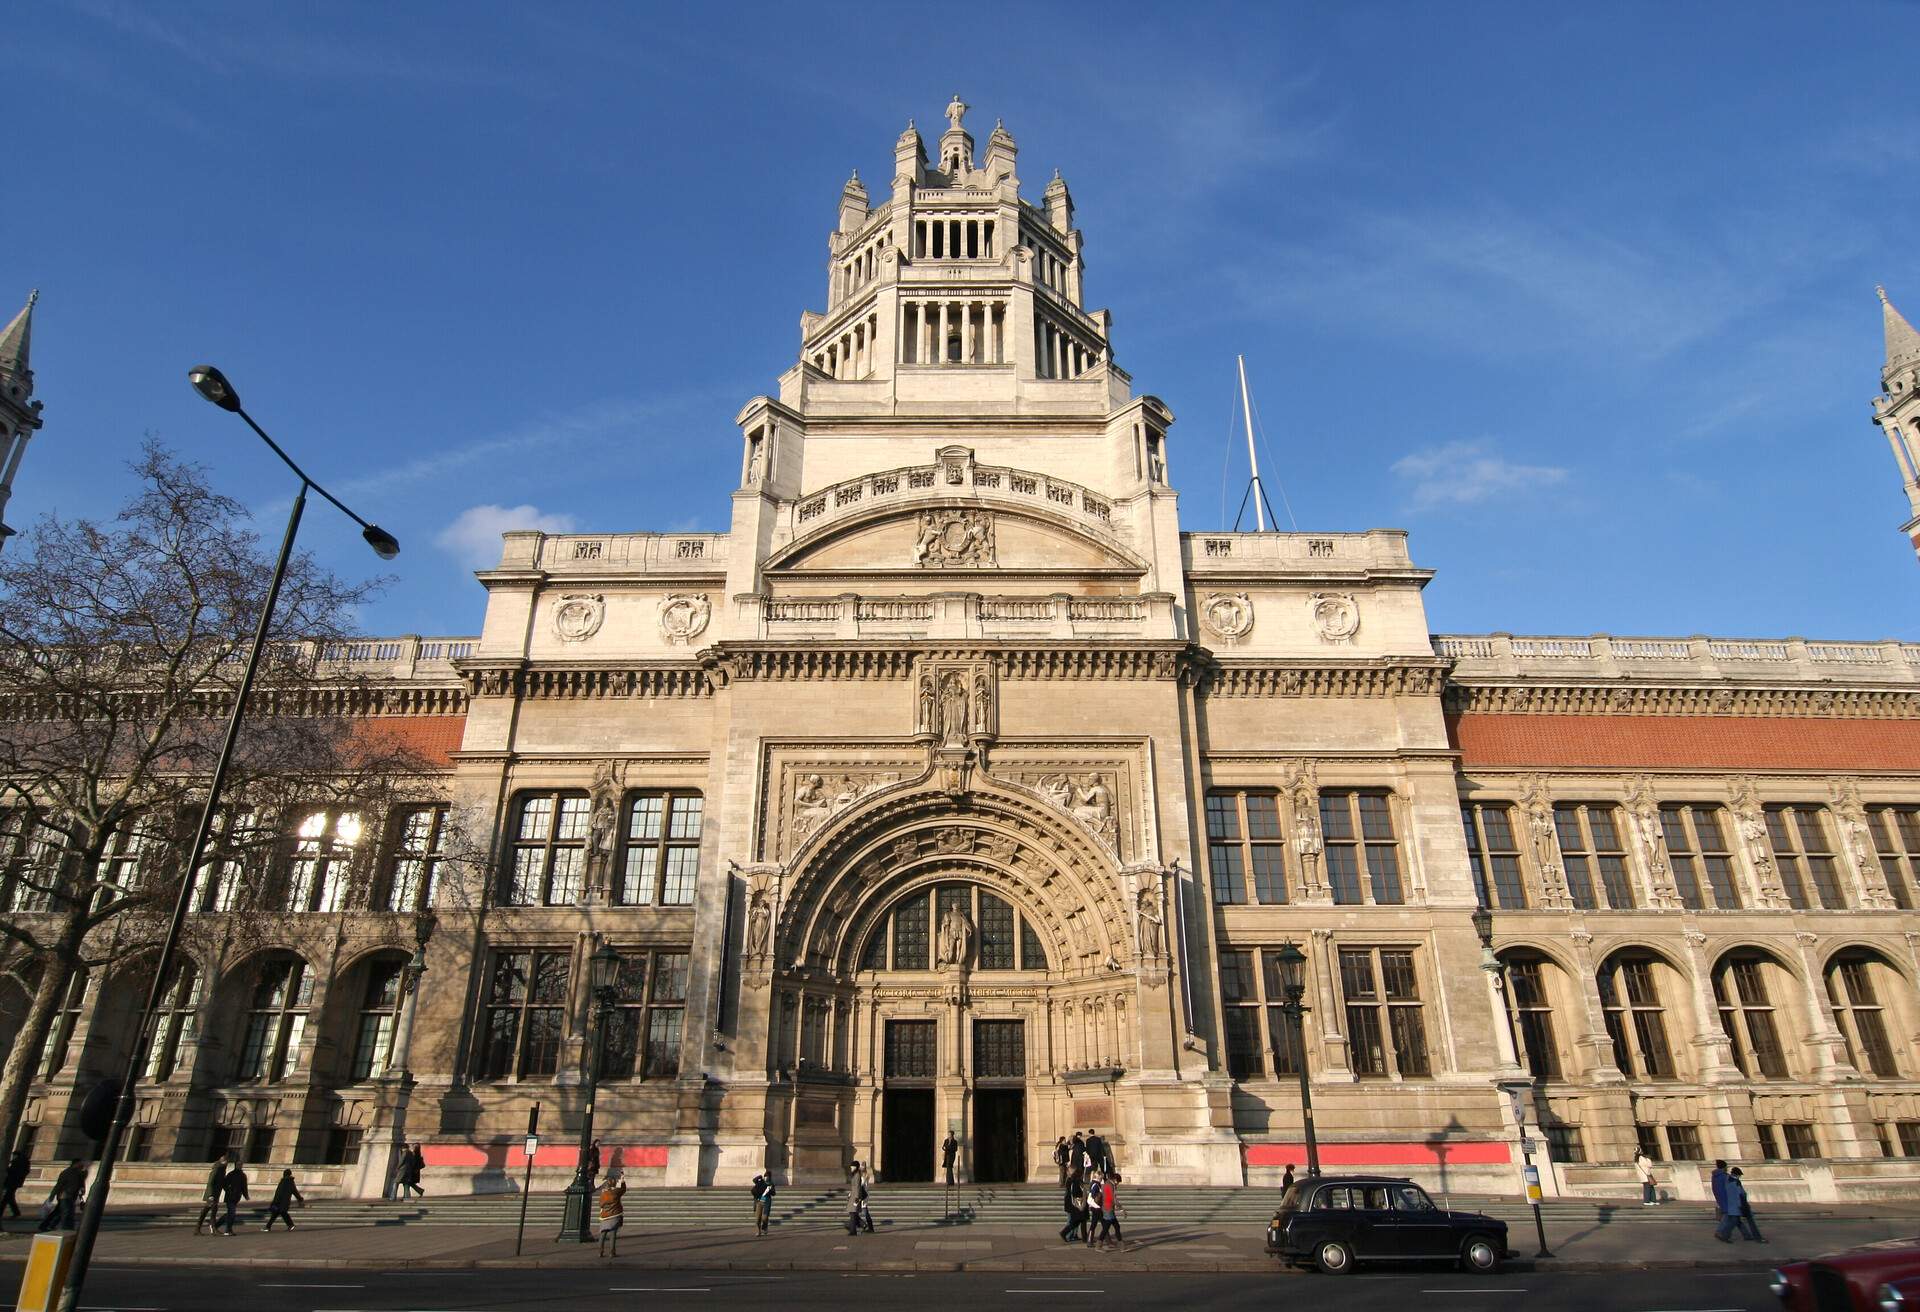 Victoria and Albert Museum is a museum with a façade of finely sculpted arch, twin doors, and a multilevel pillared tower on top.